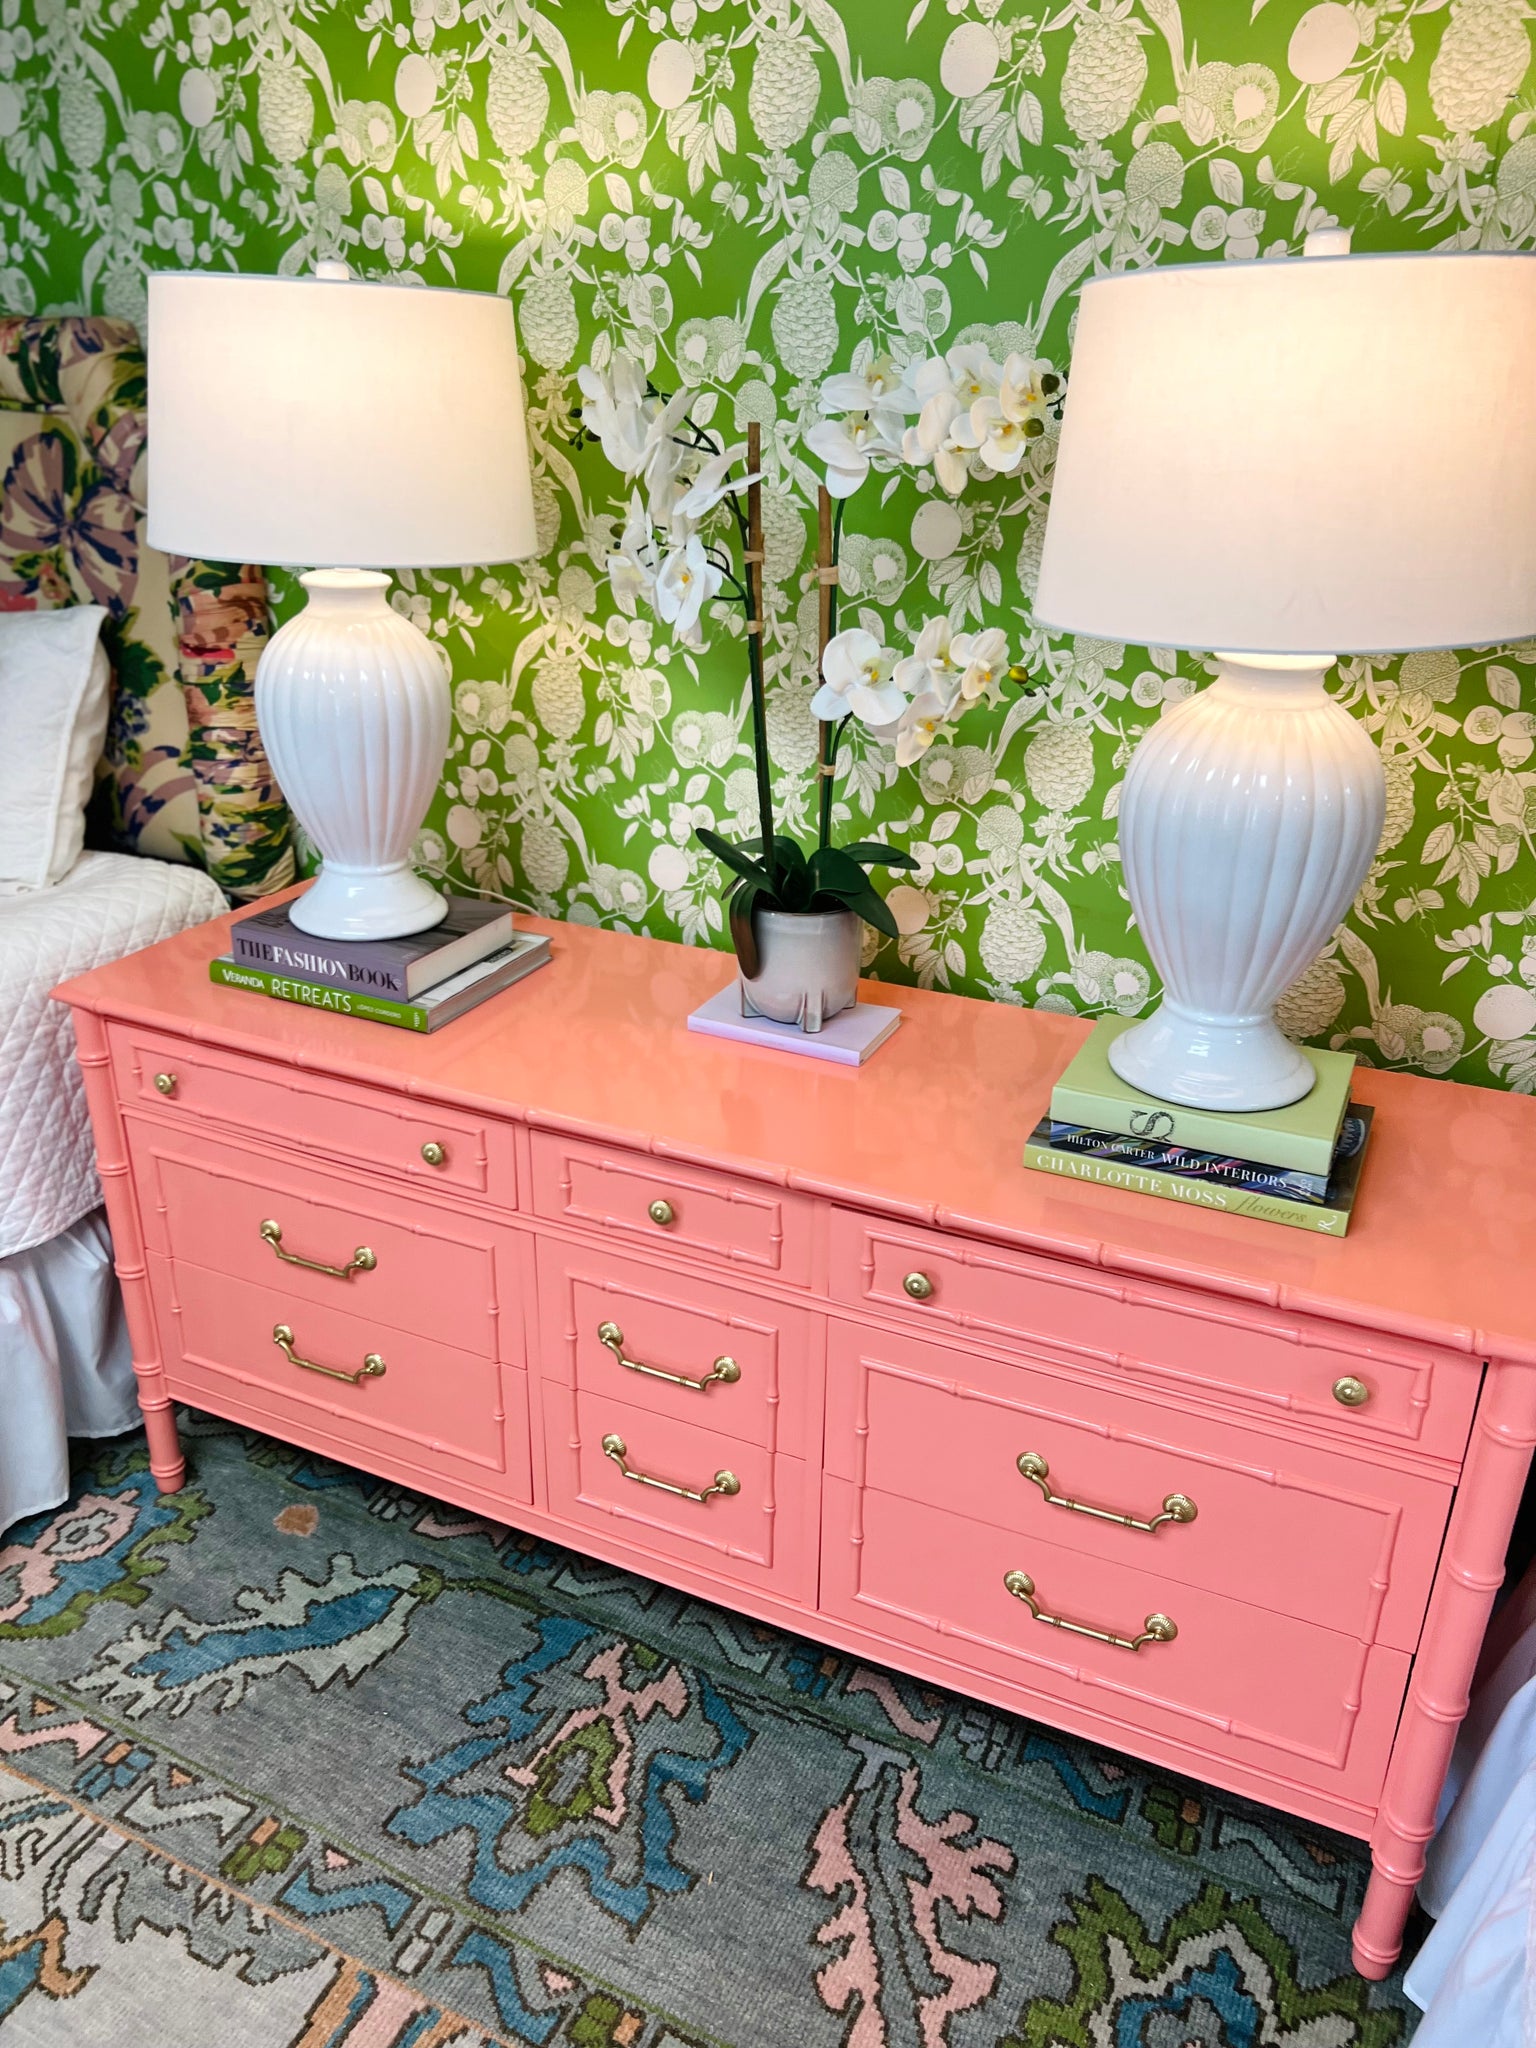 Vintage Thomasville Allegro Faux Bamboo Nine Drawer Dresser Lacquered in Coral Gables - Ready to Ship!